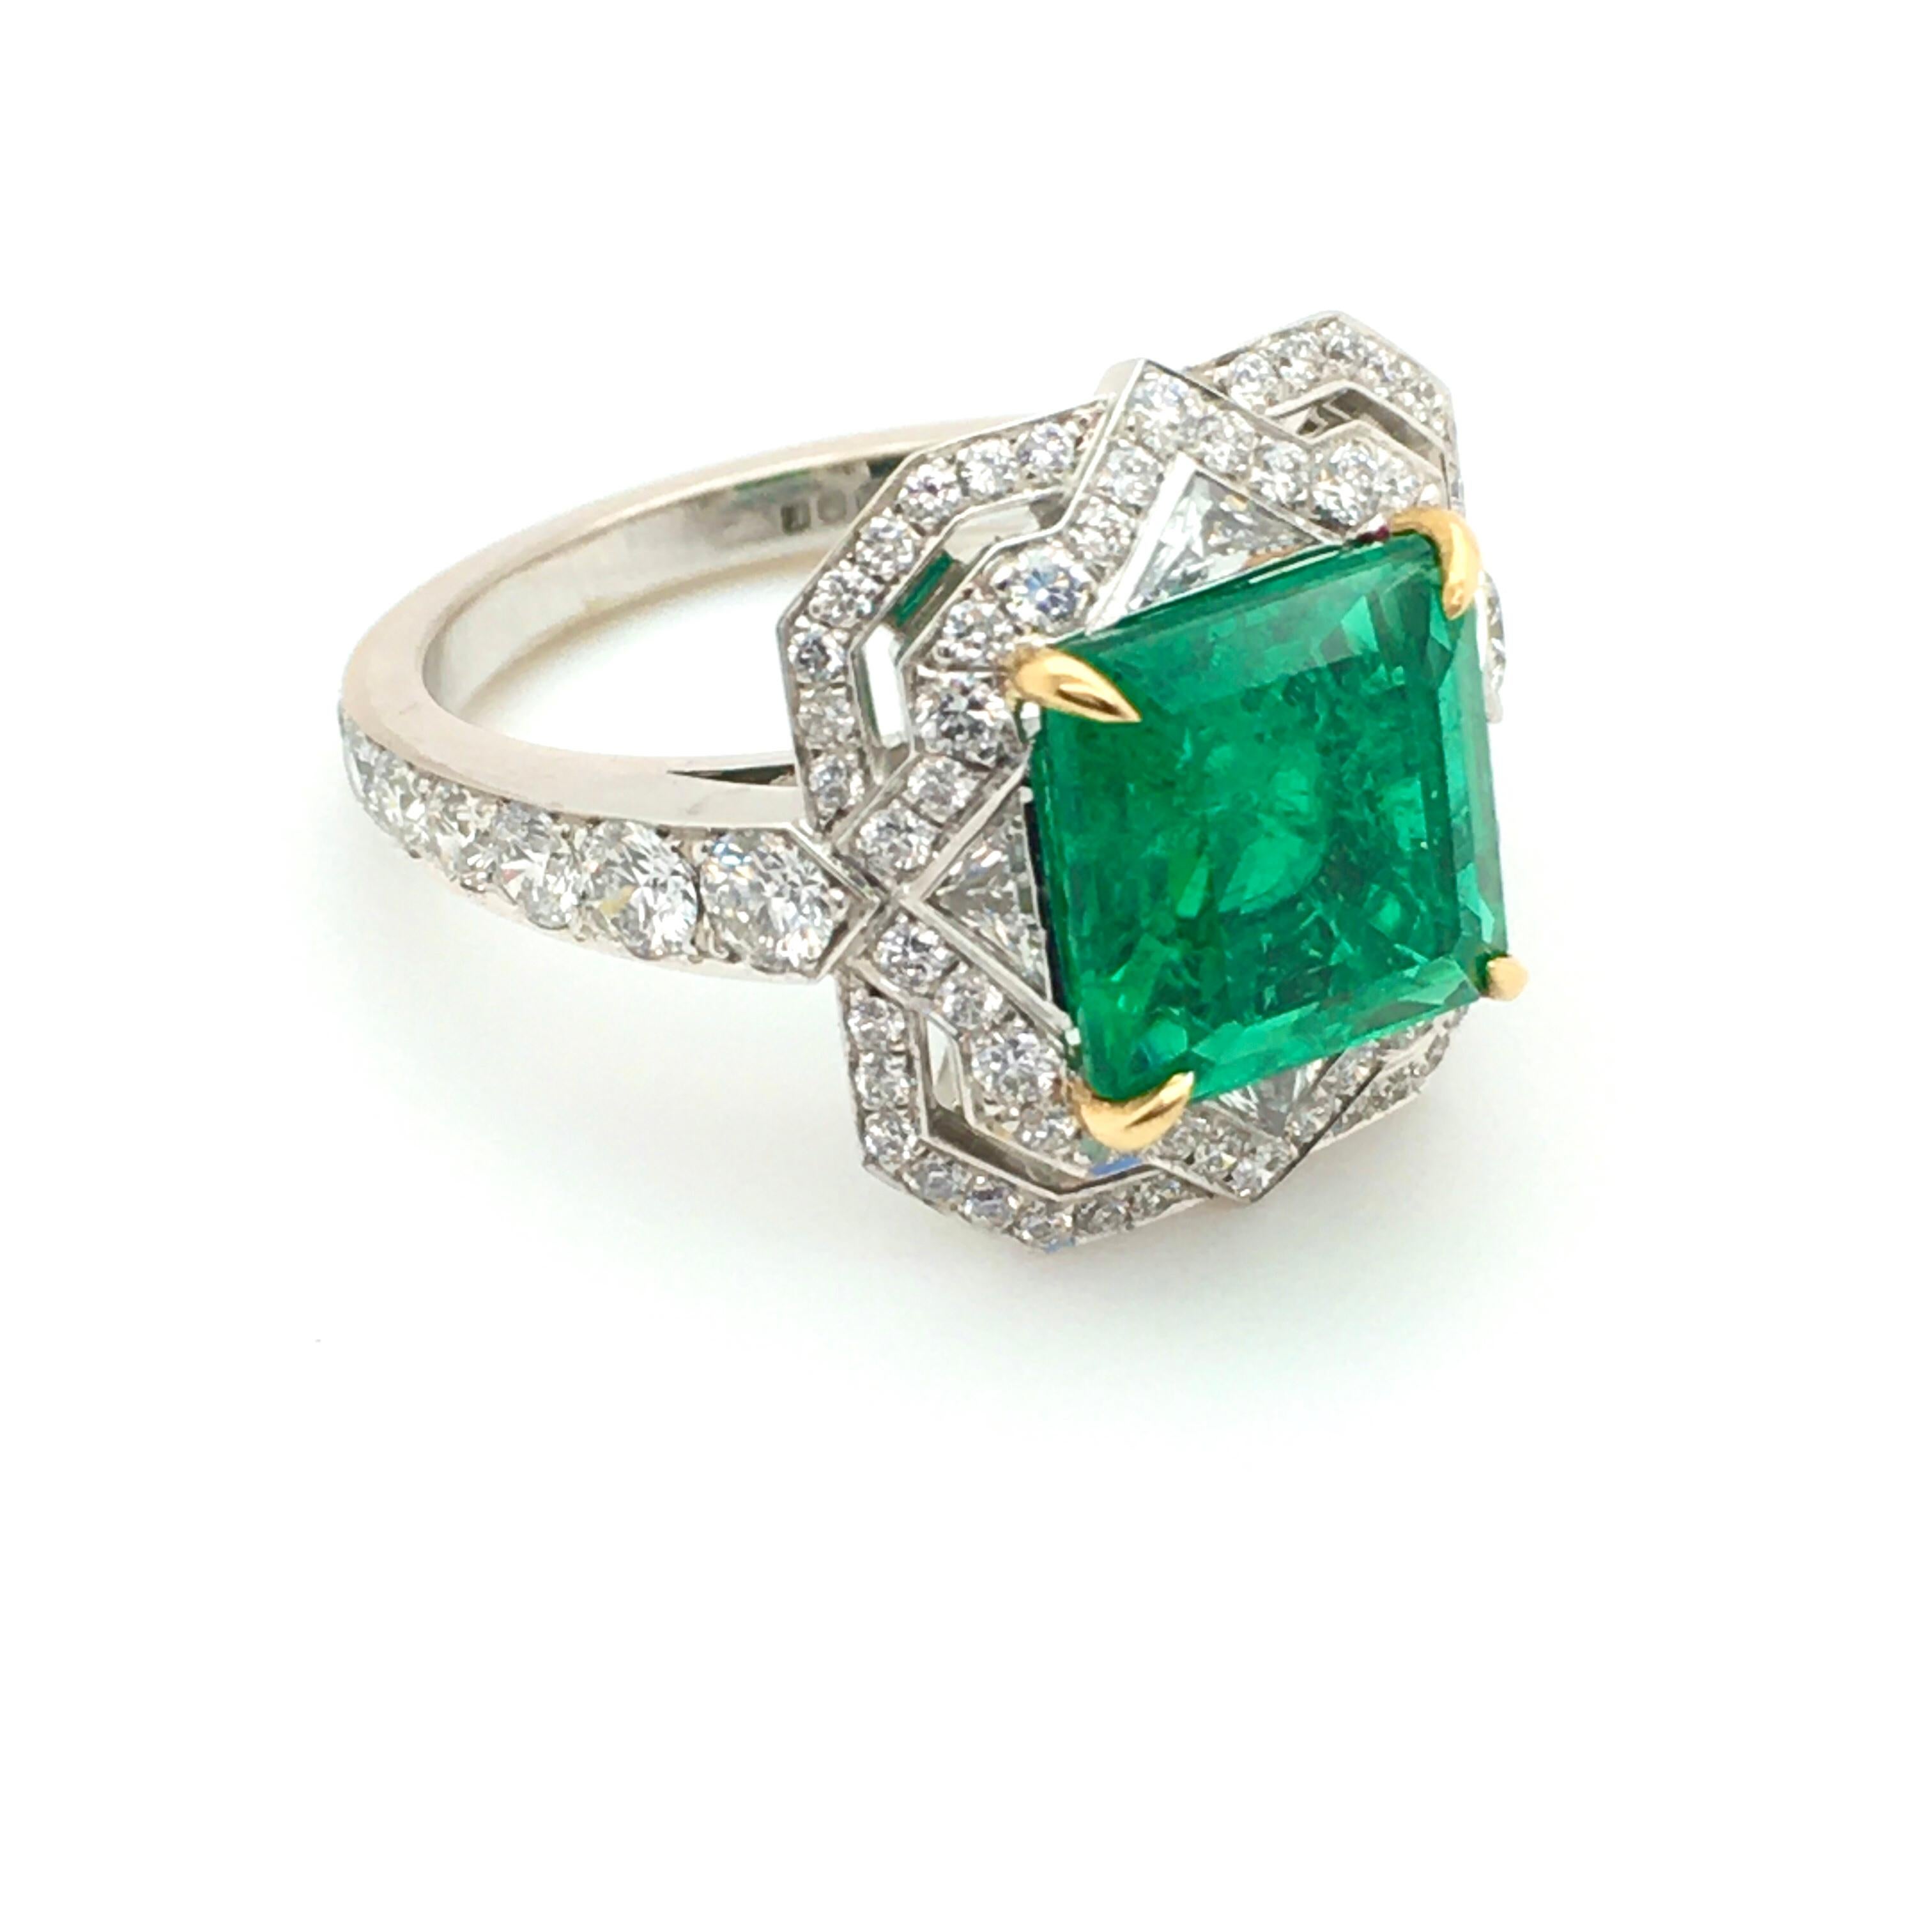 2.94 Carats Emerald Platinum Ring with White Diamond Halo in Art Deco Style In New Condition For Sale In London, GB